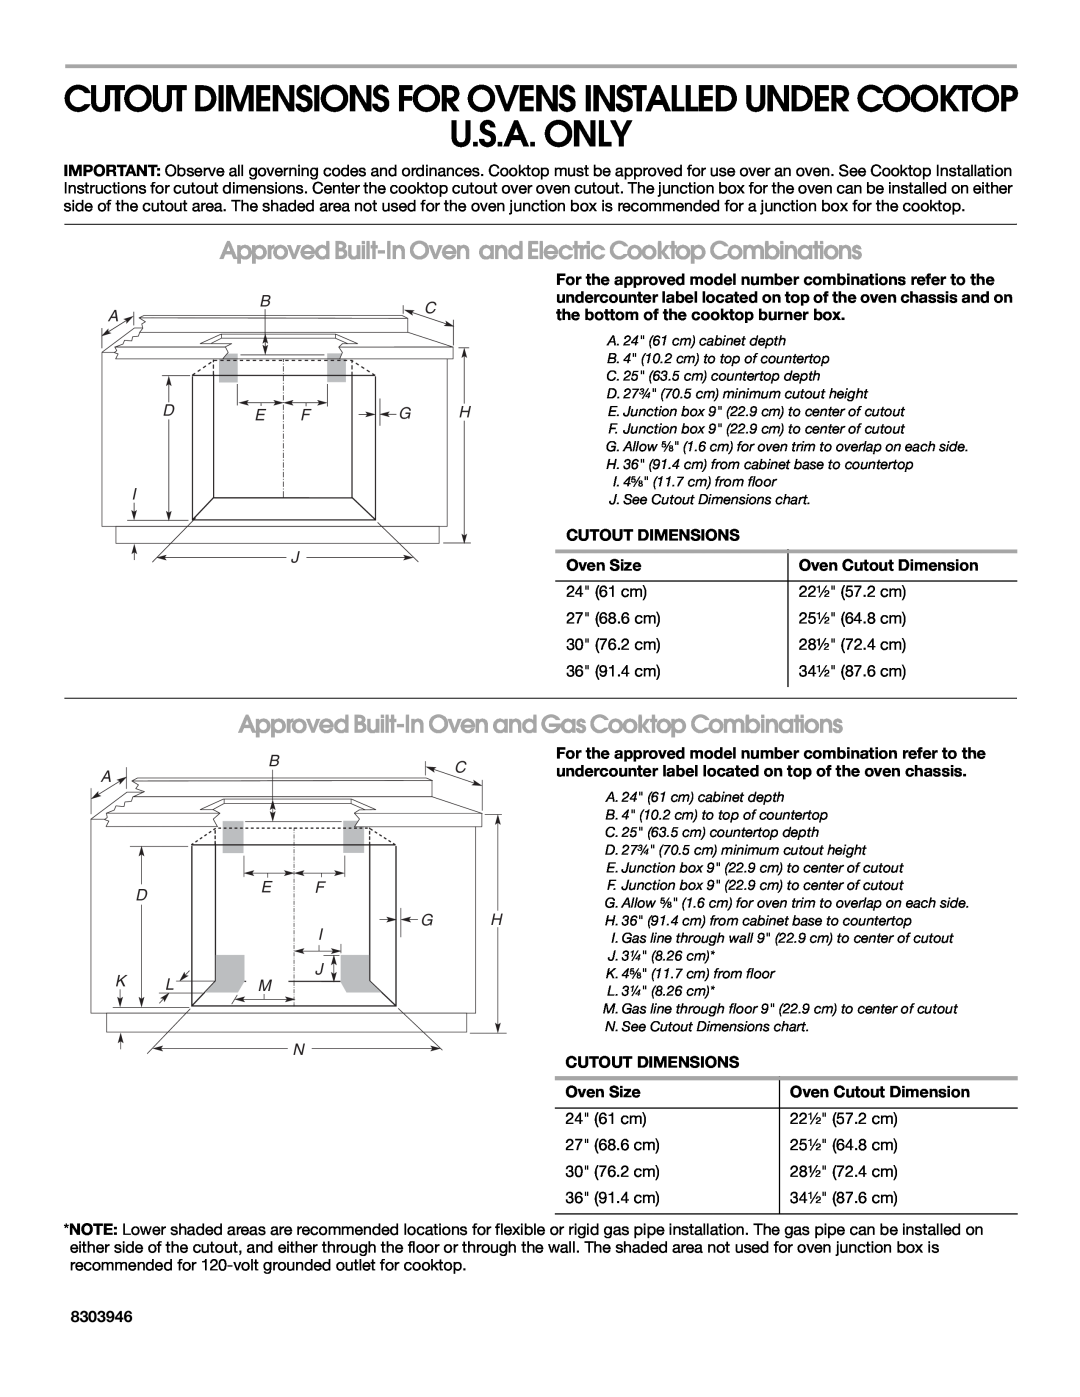 KitchenAid KEBI141D U.S.A. Only, Cutout Dimensions For Ovens Installed Under Cooktop, 8303946, 24 61 cm, 22 ¹⁄₂ 57.2 cm 